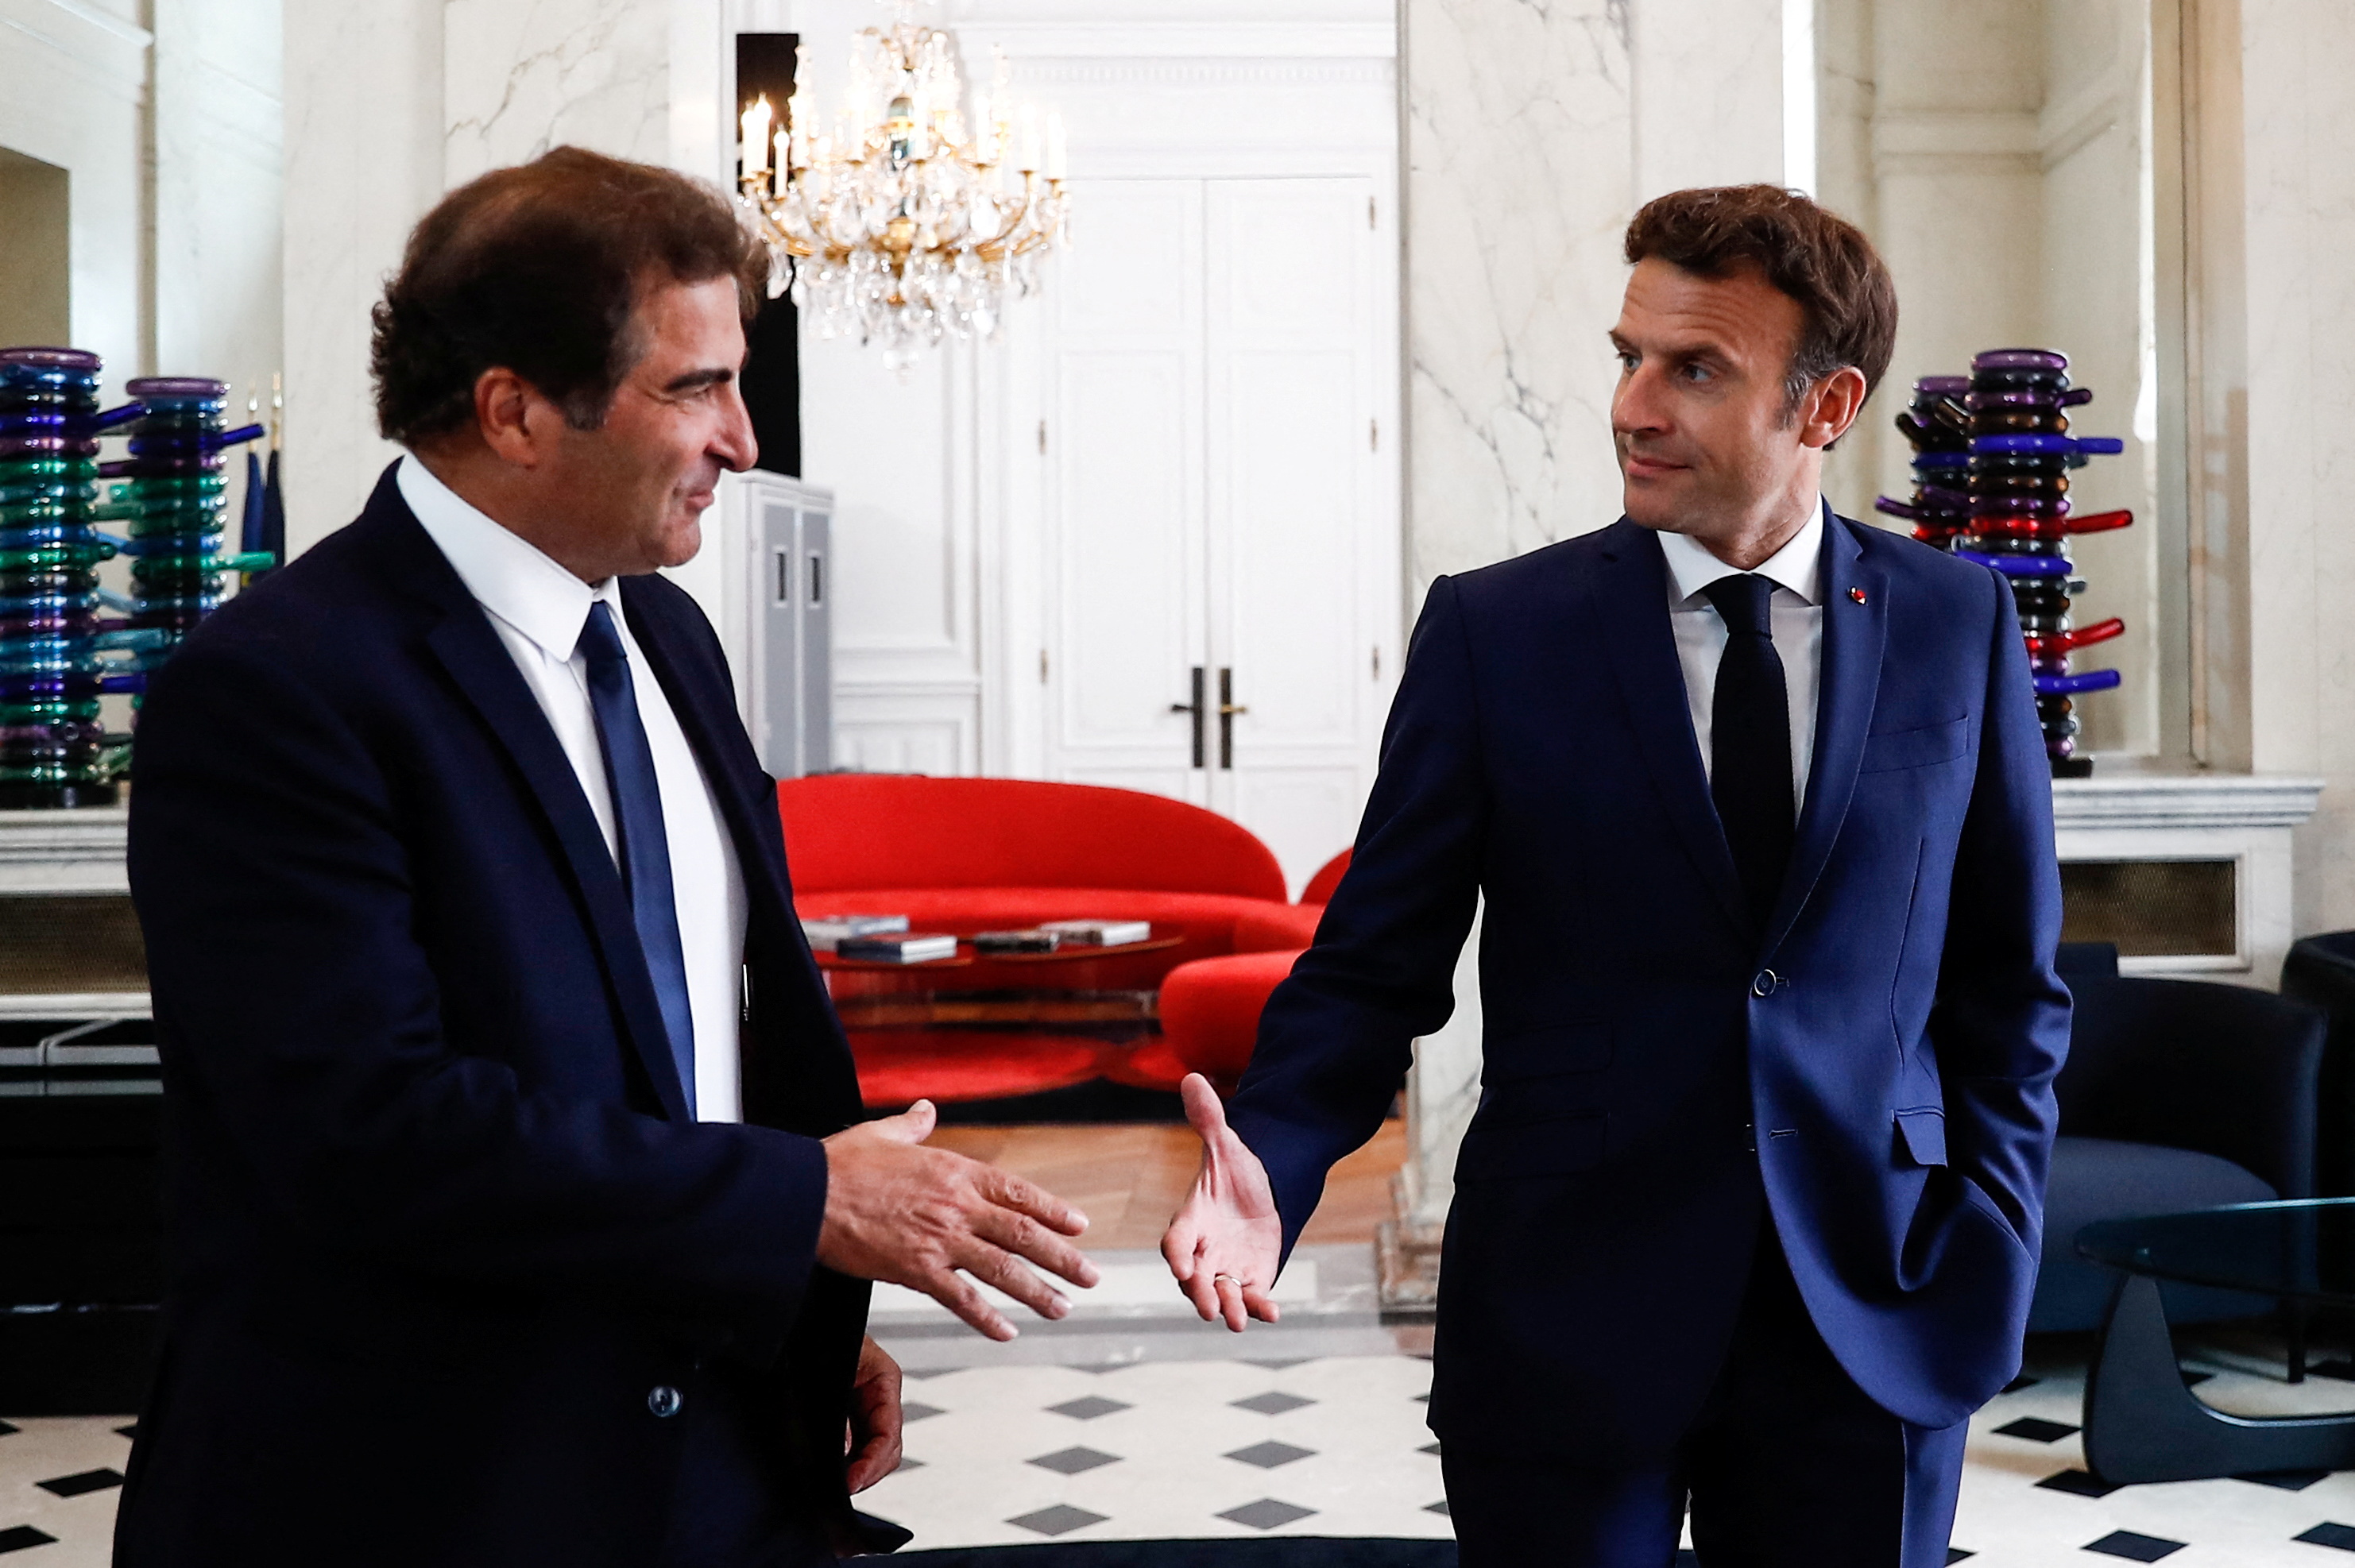 French President Macron meets head of the Les Republicains party Jacob